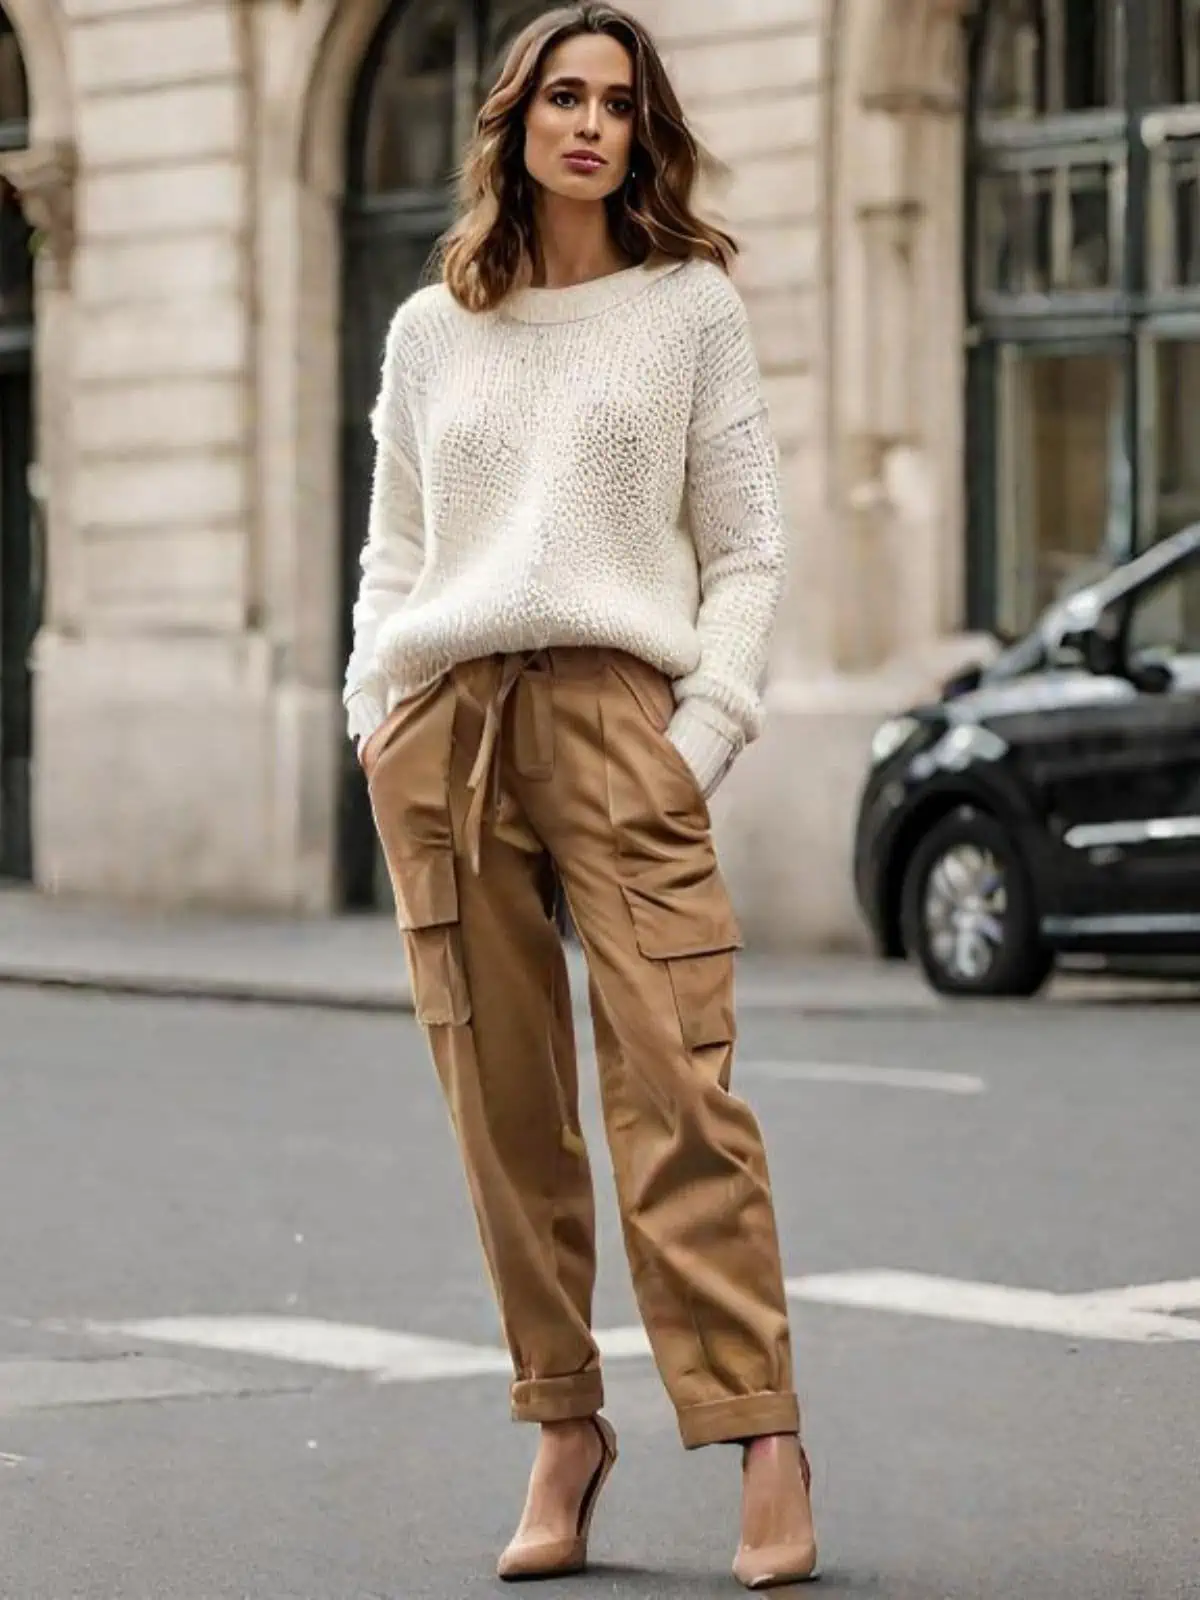 Brown pants ideas for back to school. Brown pants outfits. Women's